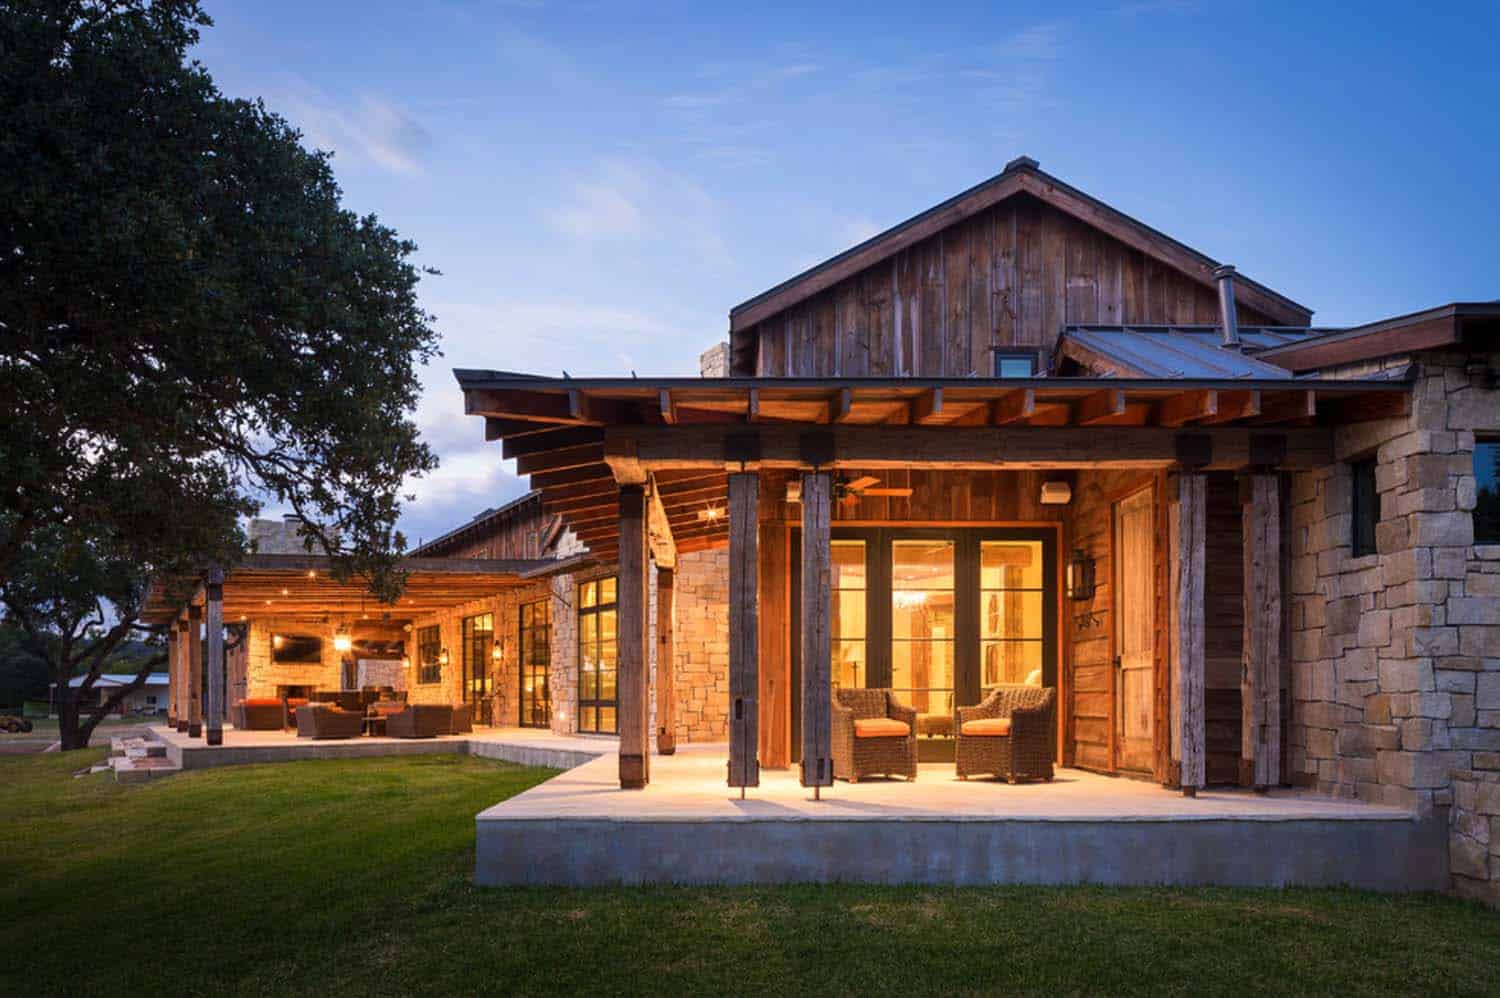 Modern-rustic barn style retreat in Texas Hill Country